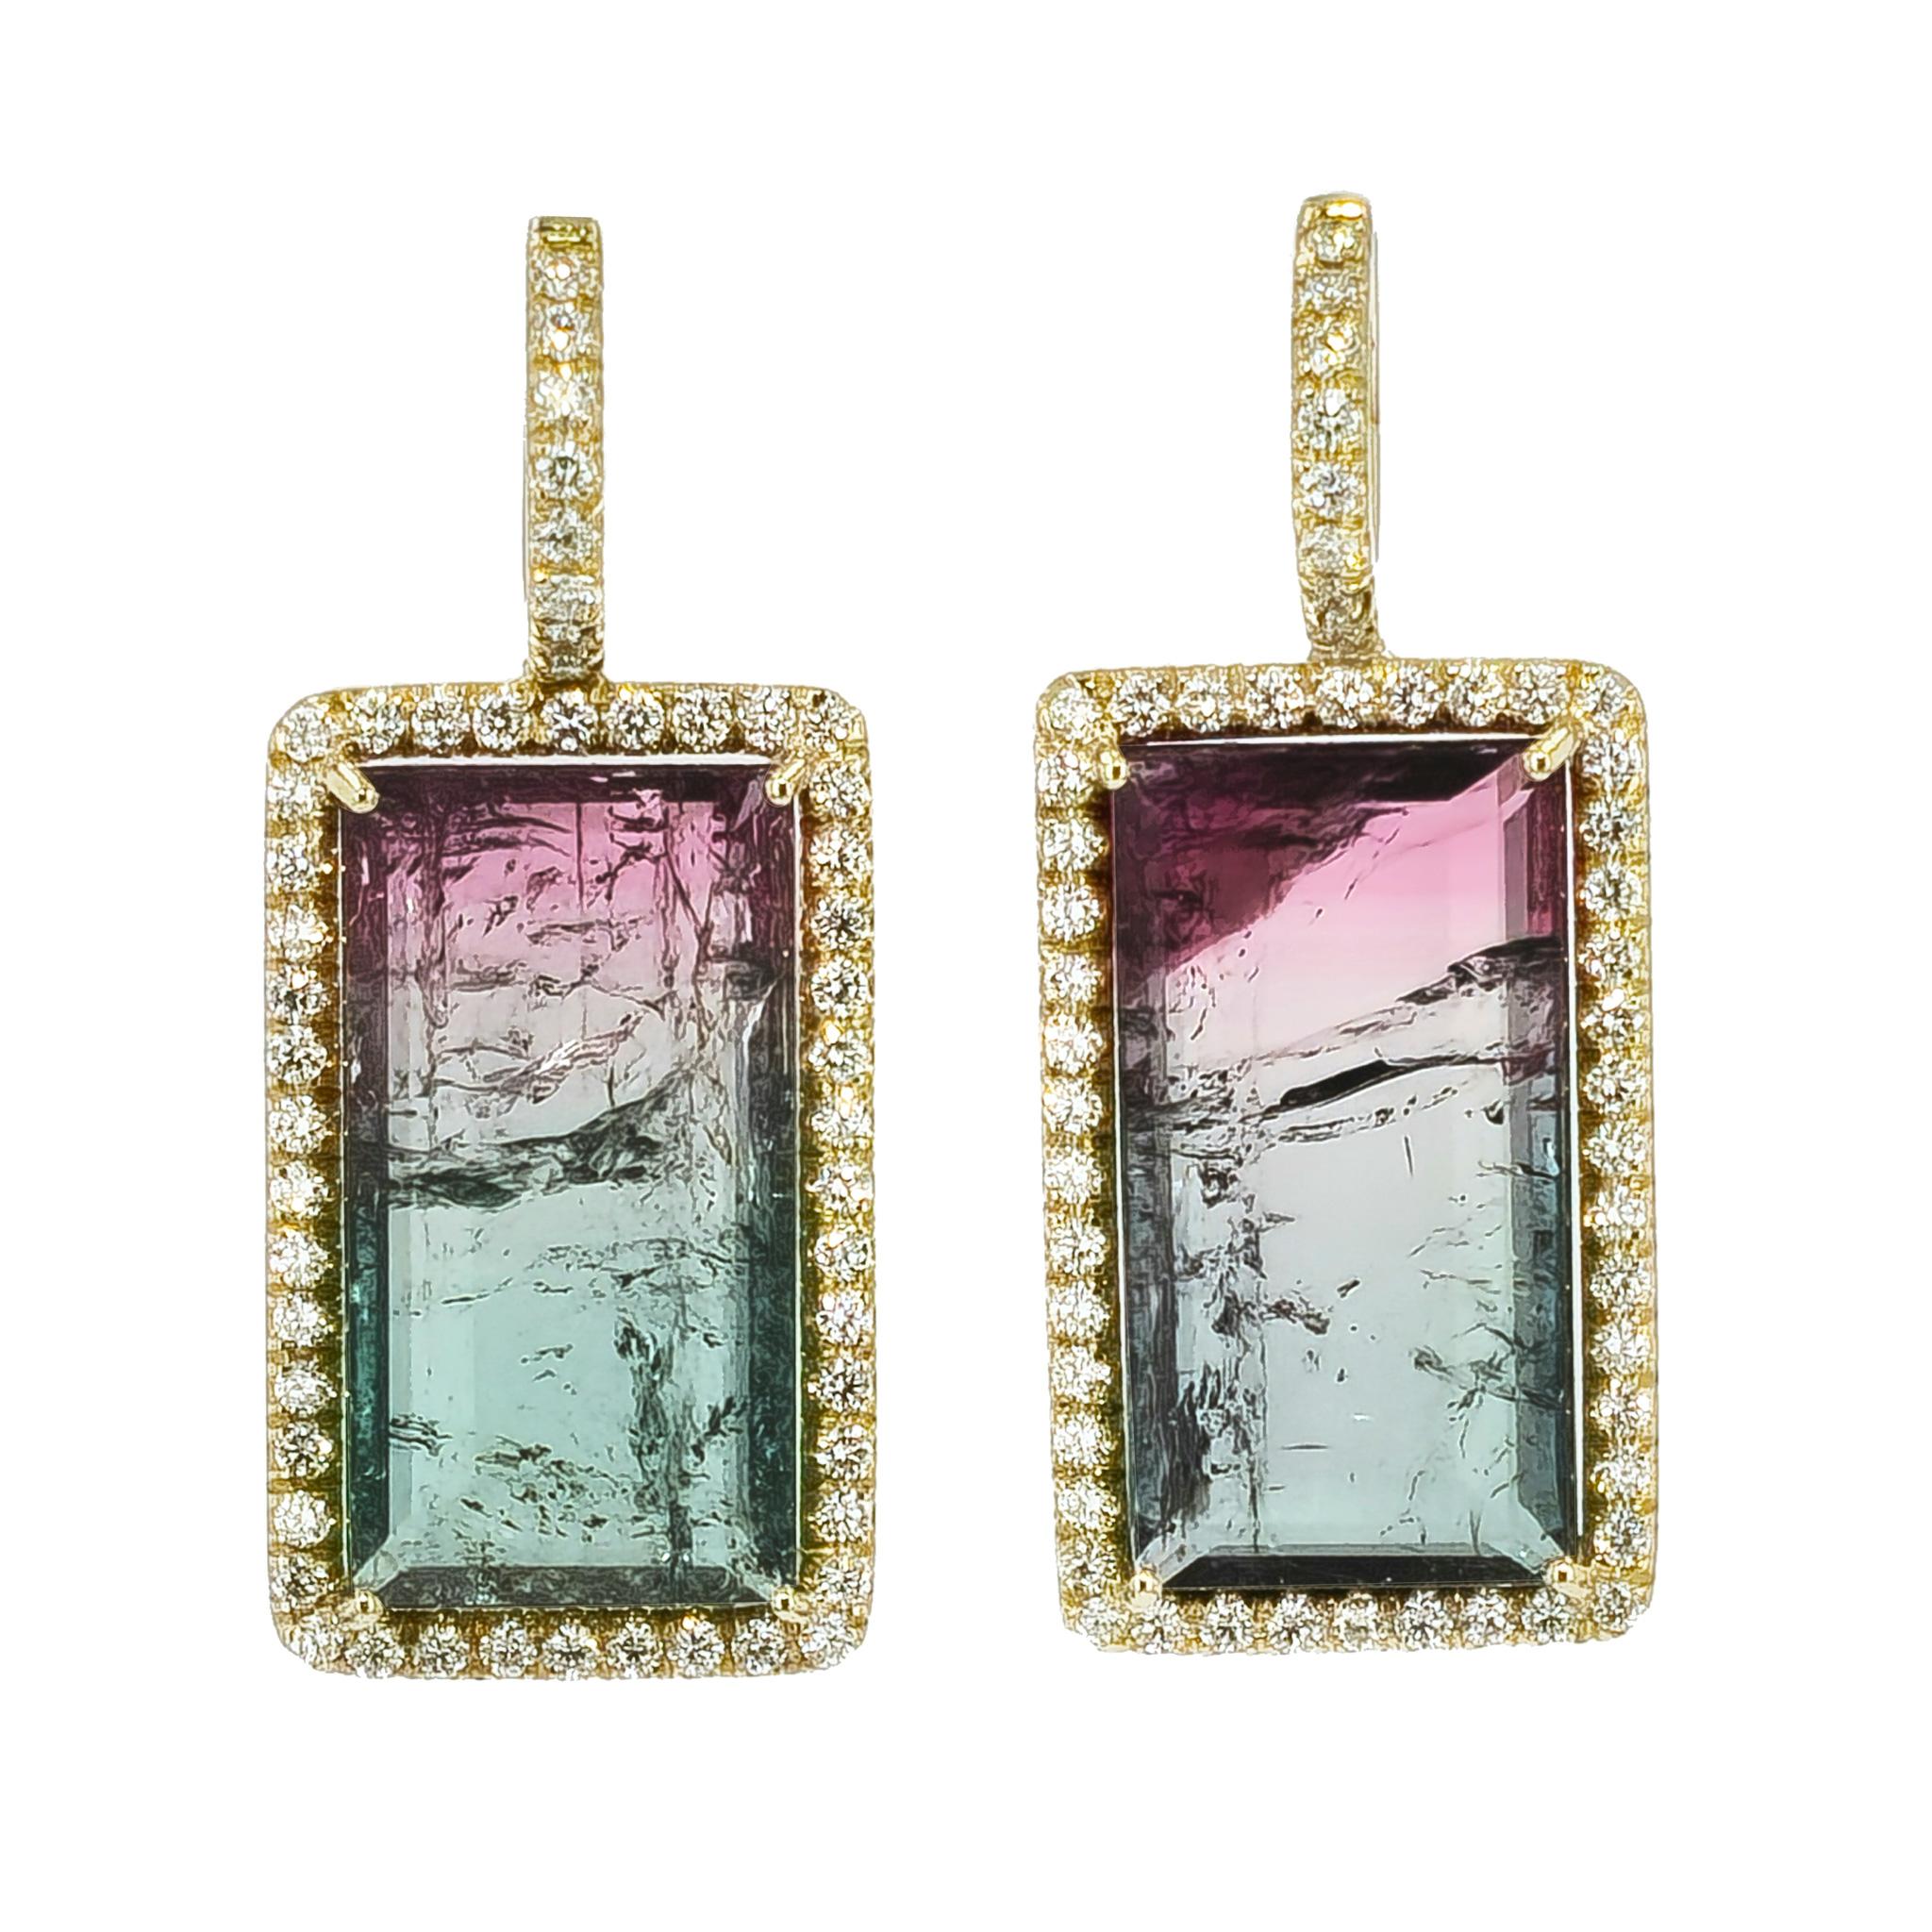 Emerald Cut Handmade Bi-Colored Pink and Green Tourmaline Yellow Gold Diamond Pave Earrings For Sale